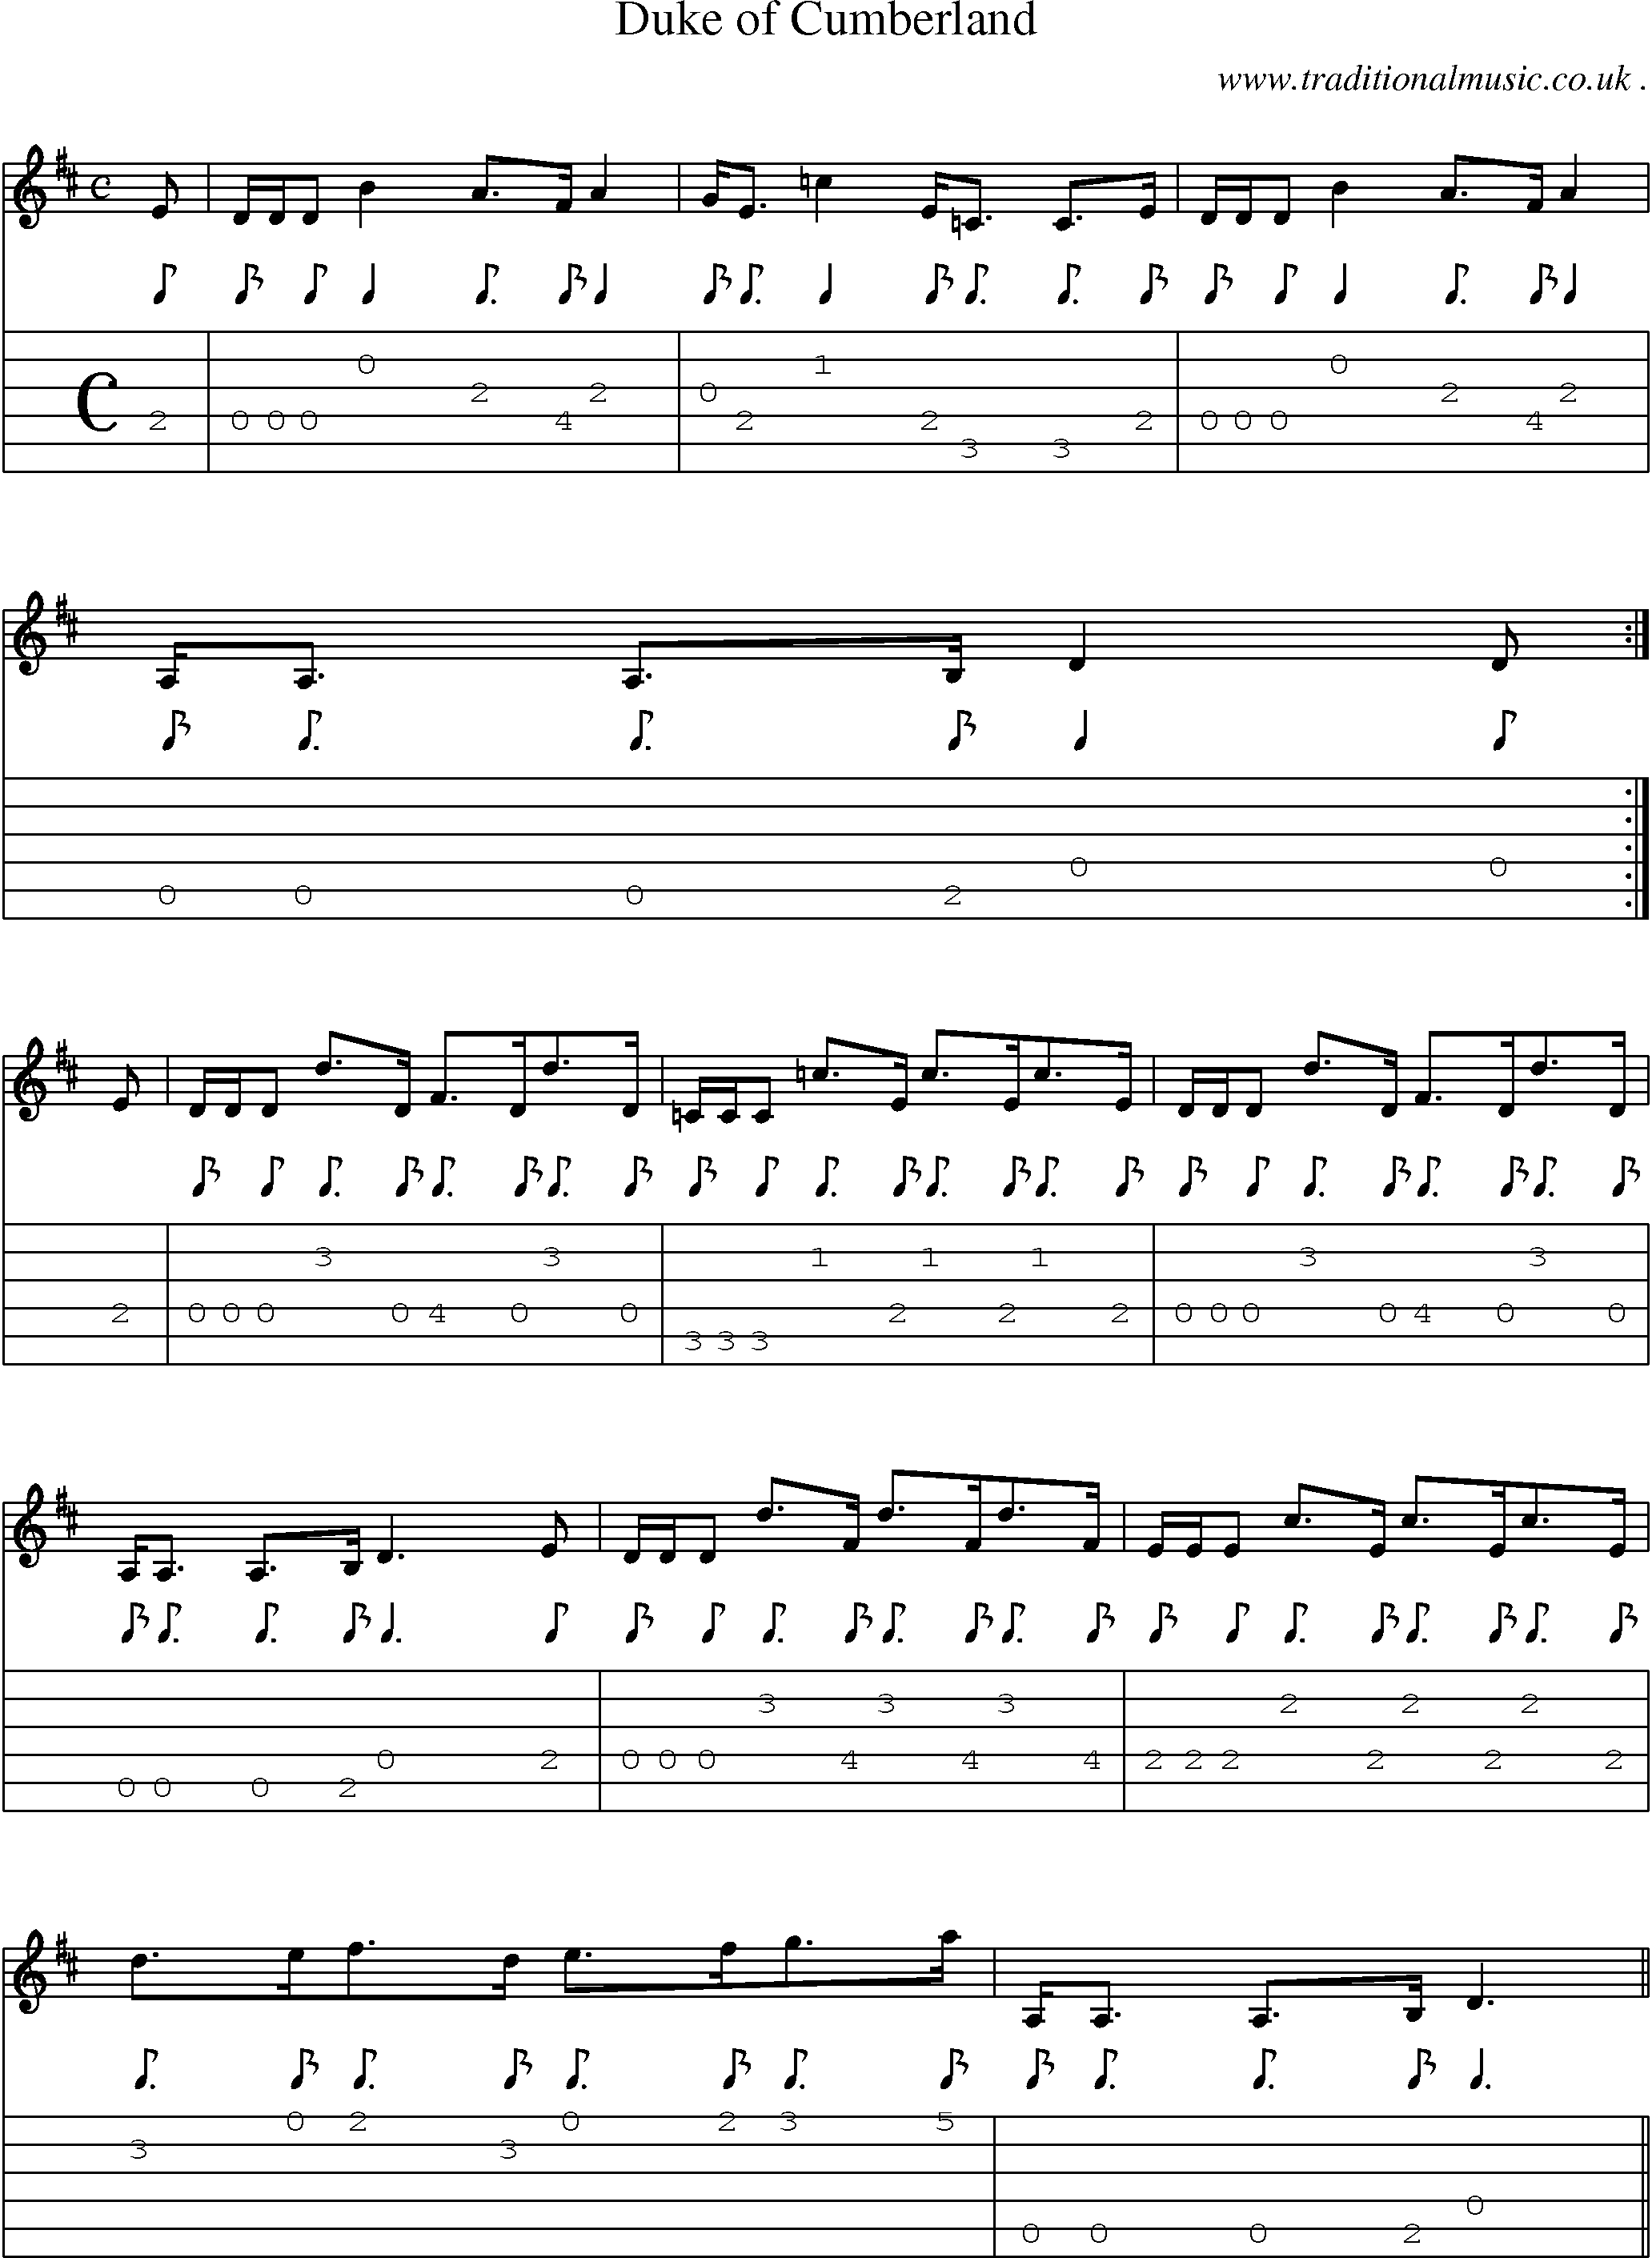 Sheet-music  score, Chords and Guitar Tabs for Duke Of Cumberland